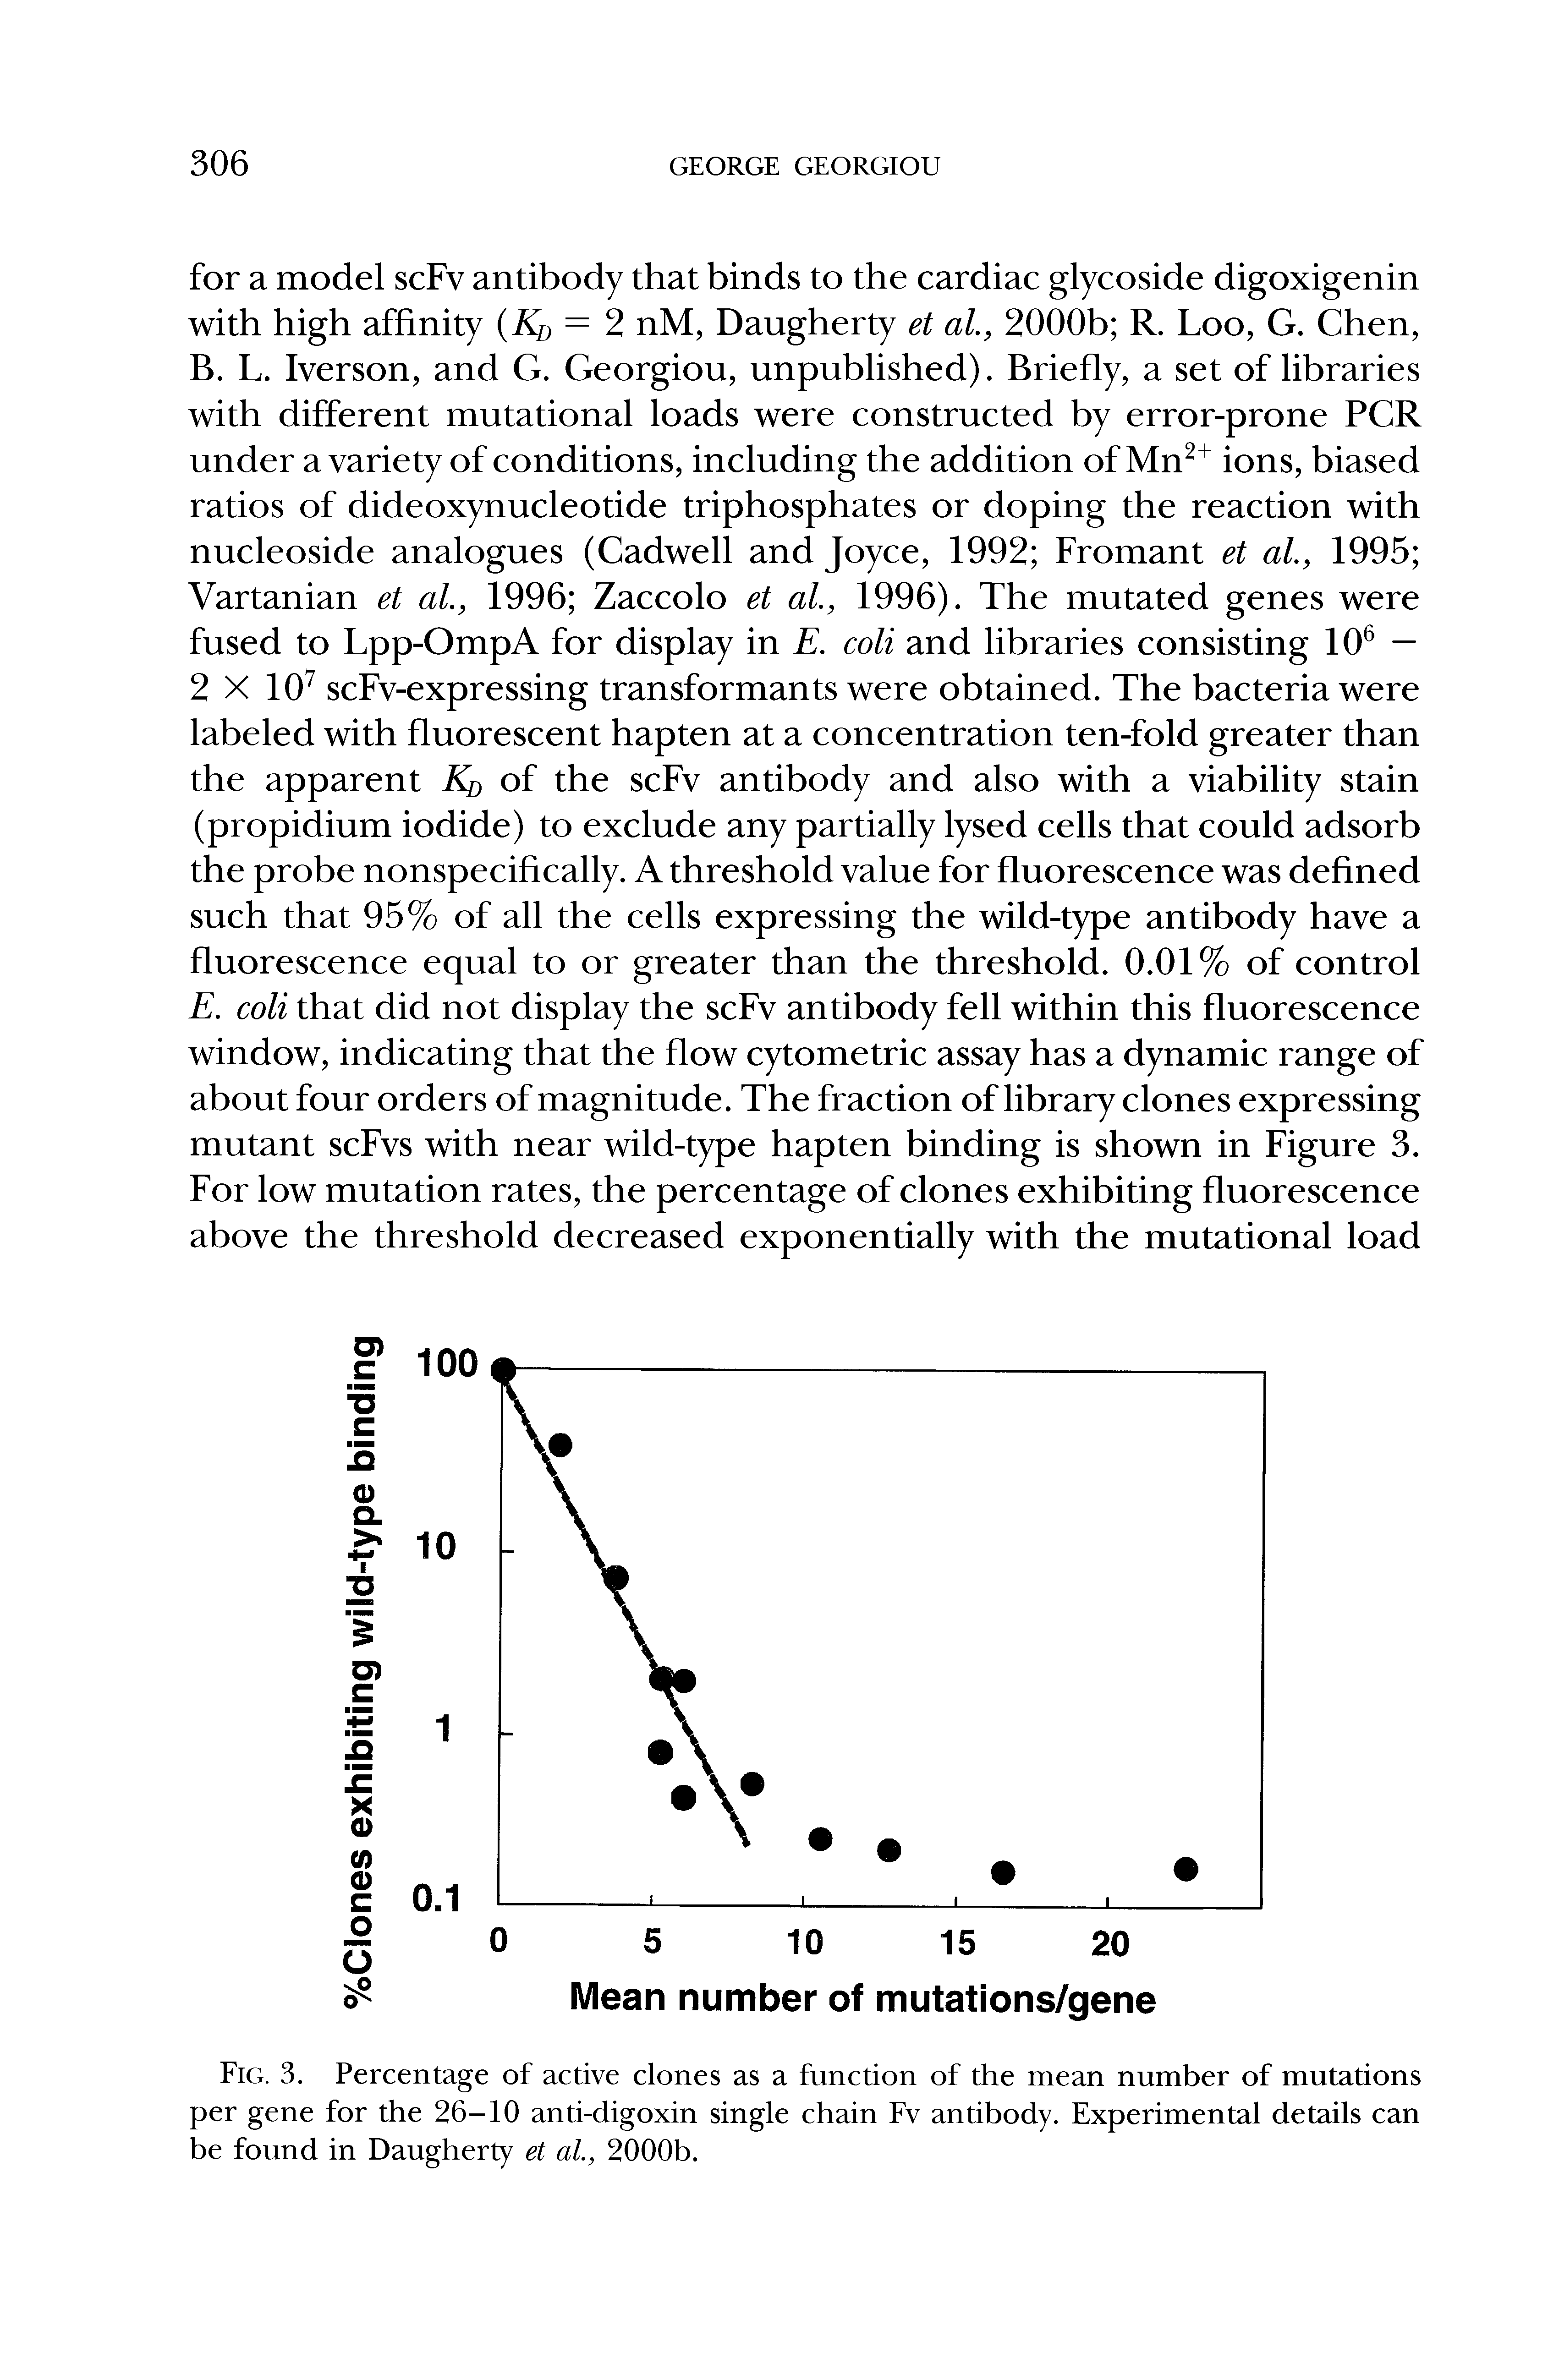 Fig. 3. Percentage of active clones as a function of the mean number of mutations per gene for the 26-10 anti-digoxin single chain Fv antibody. Experimental details can be found in Daugherty et al, 2000b.